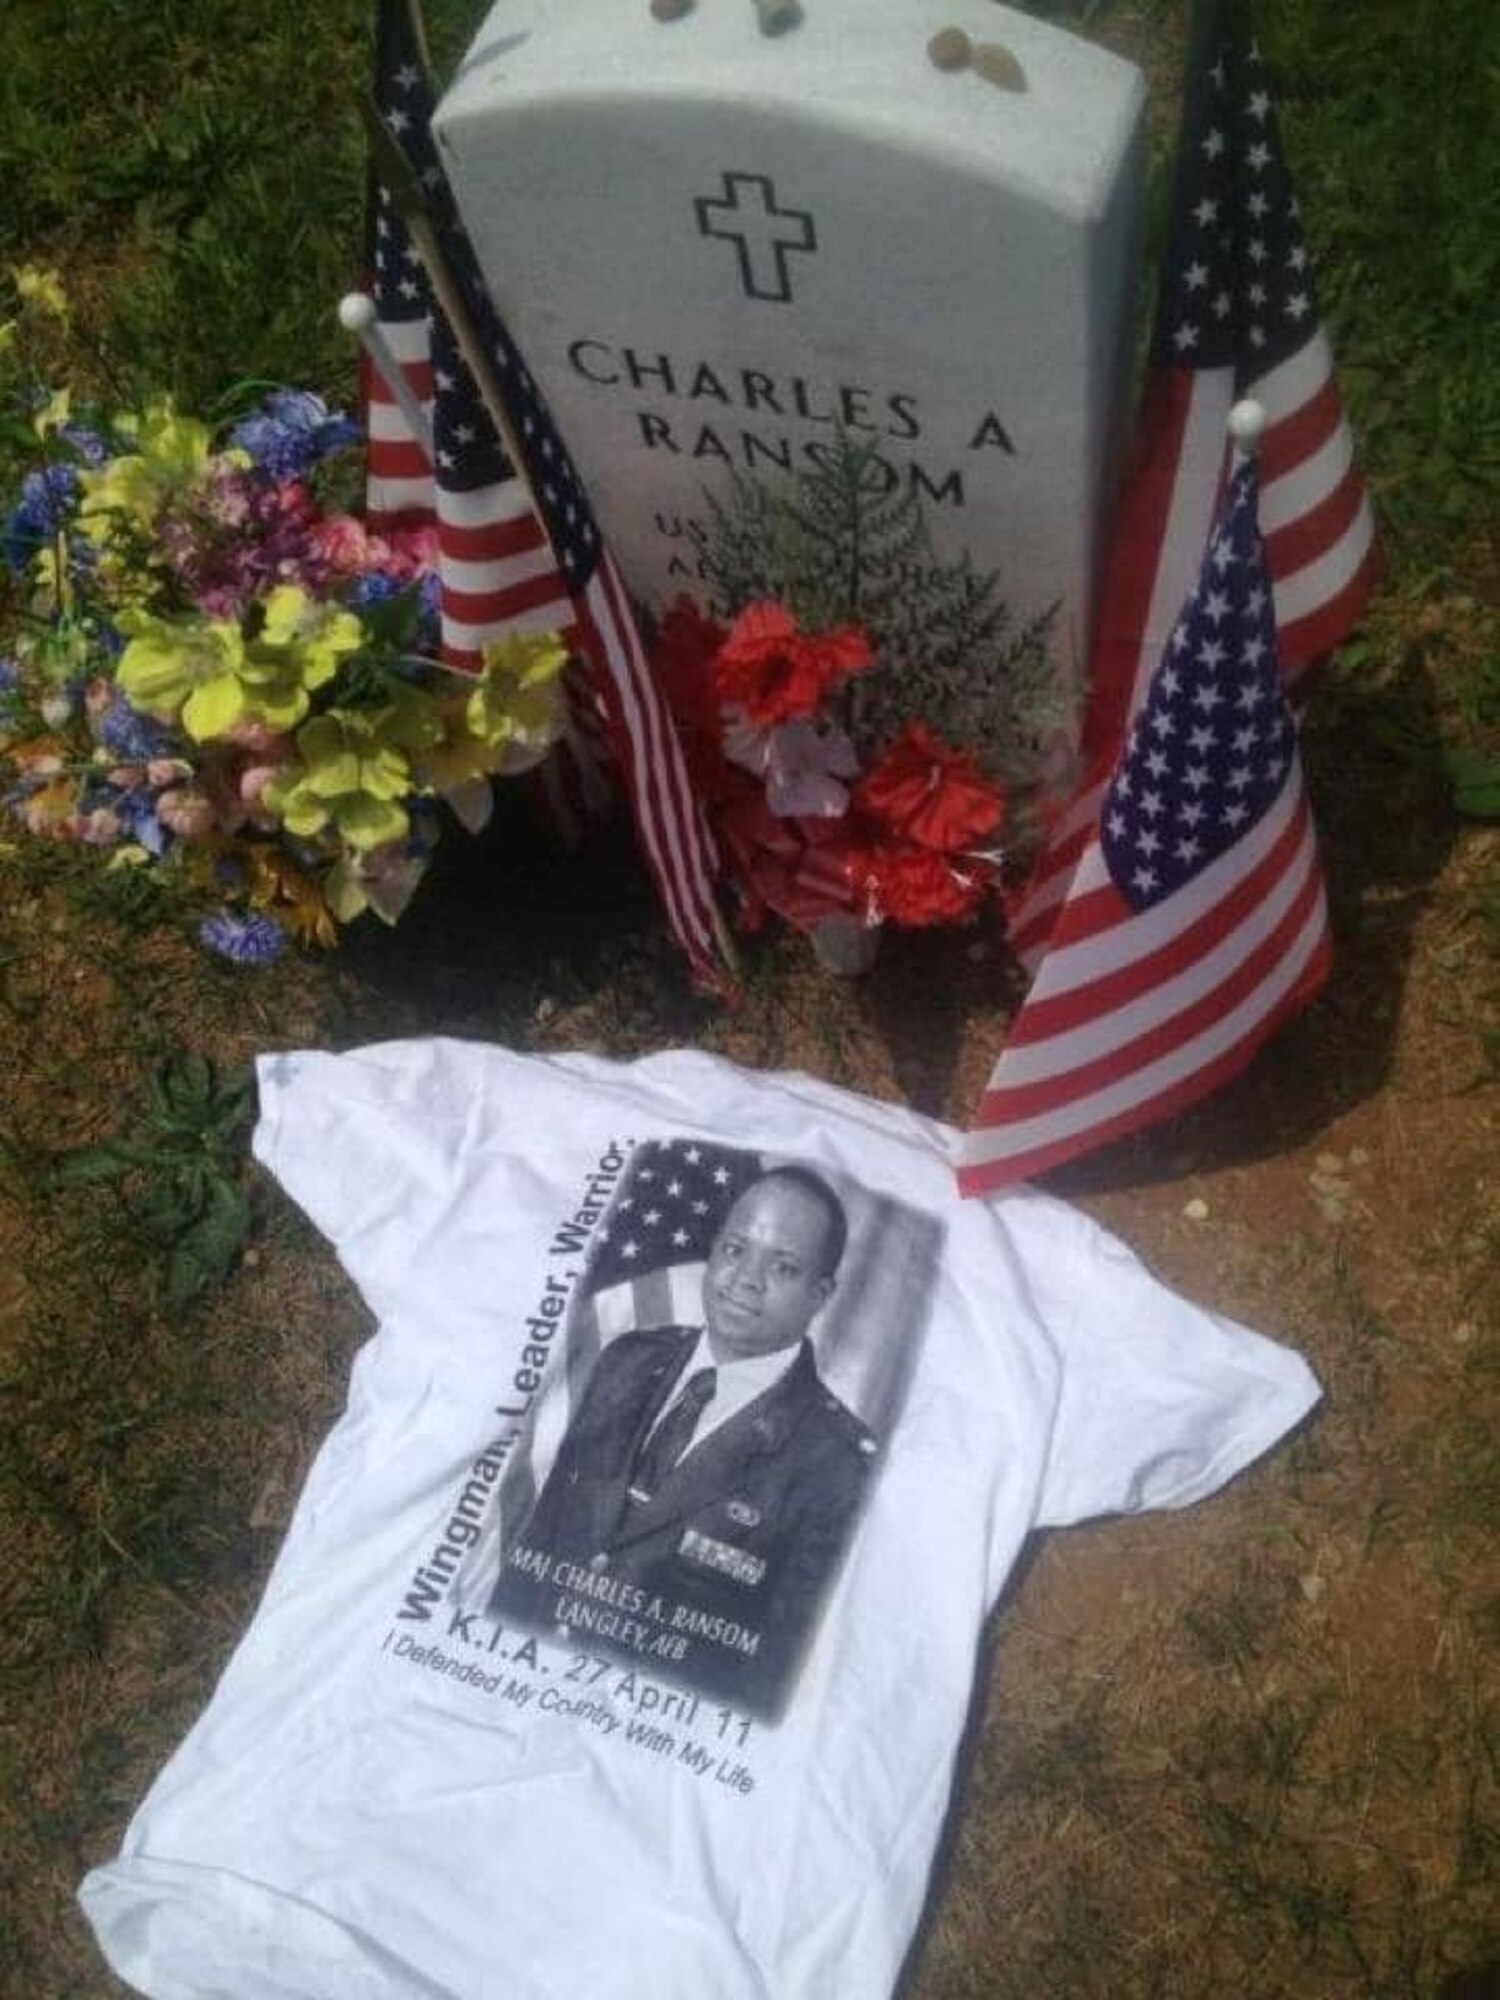 The grave of Major Charles Ransom, flight commander of plans and operations, 83rd Network Operations Squadron, is decorated with flowers, flags and a shirt that says, Wingman, Leader, Warrior, which is part of the Airman’s Creed. Ransom made the ultimate sacrifice April 27, 2011. (Courtesy photo)